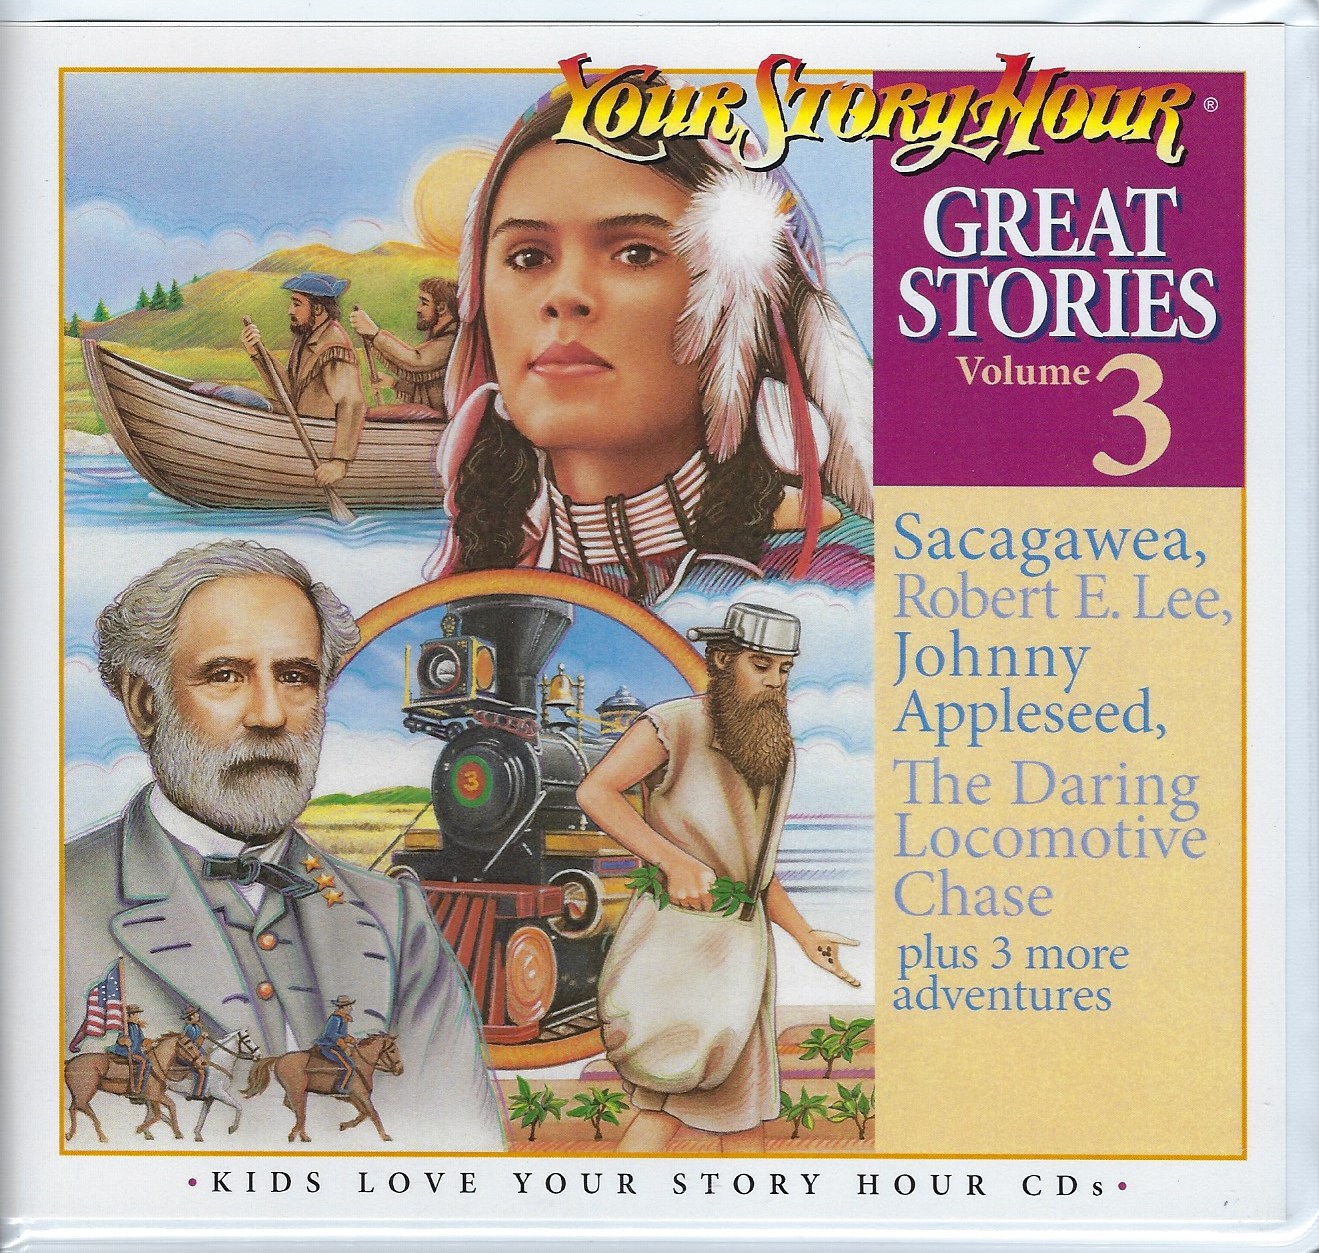 GREAT STORIES VOLUME 3 CD ALBUM Your Story Hour